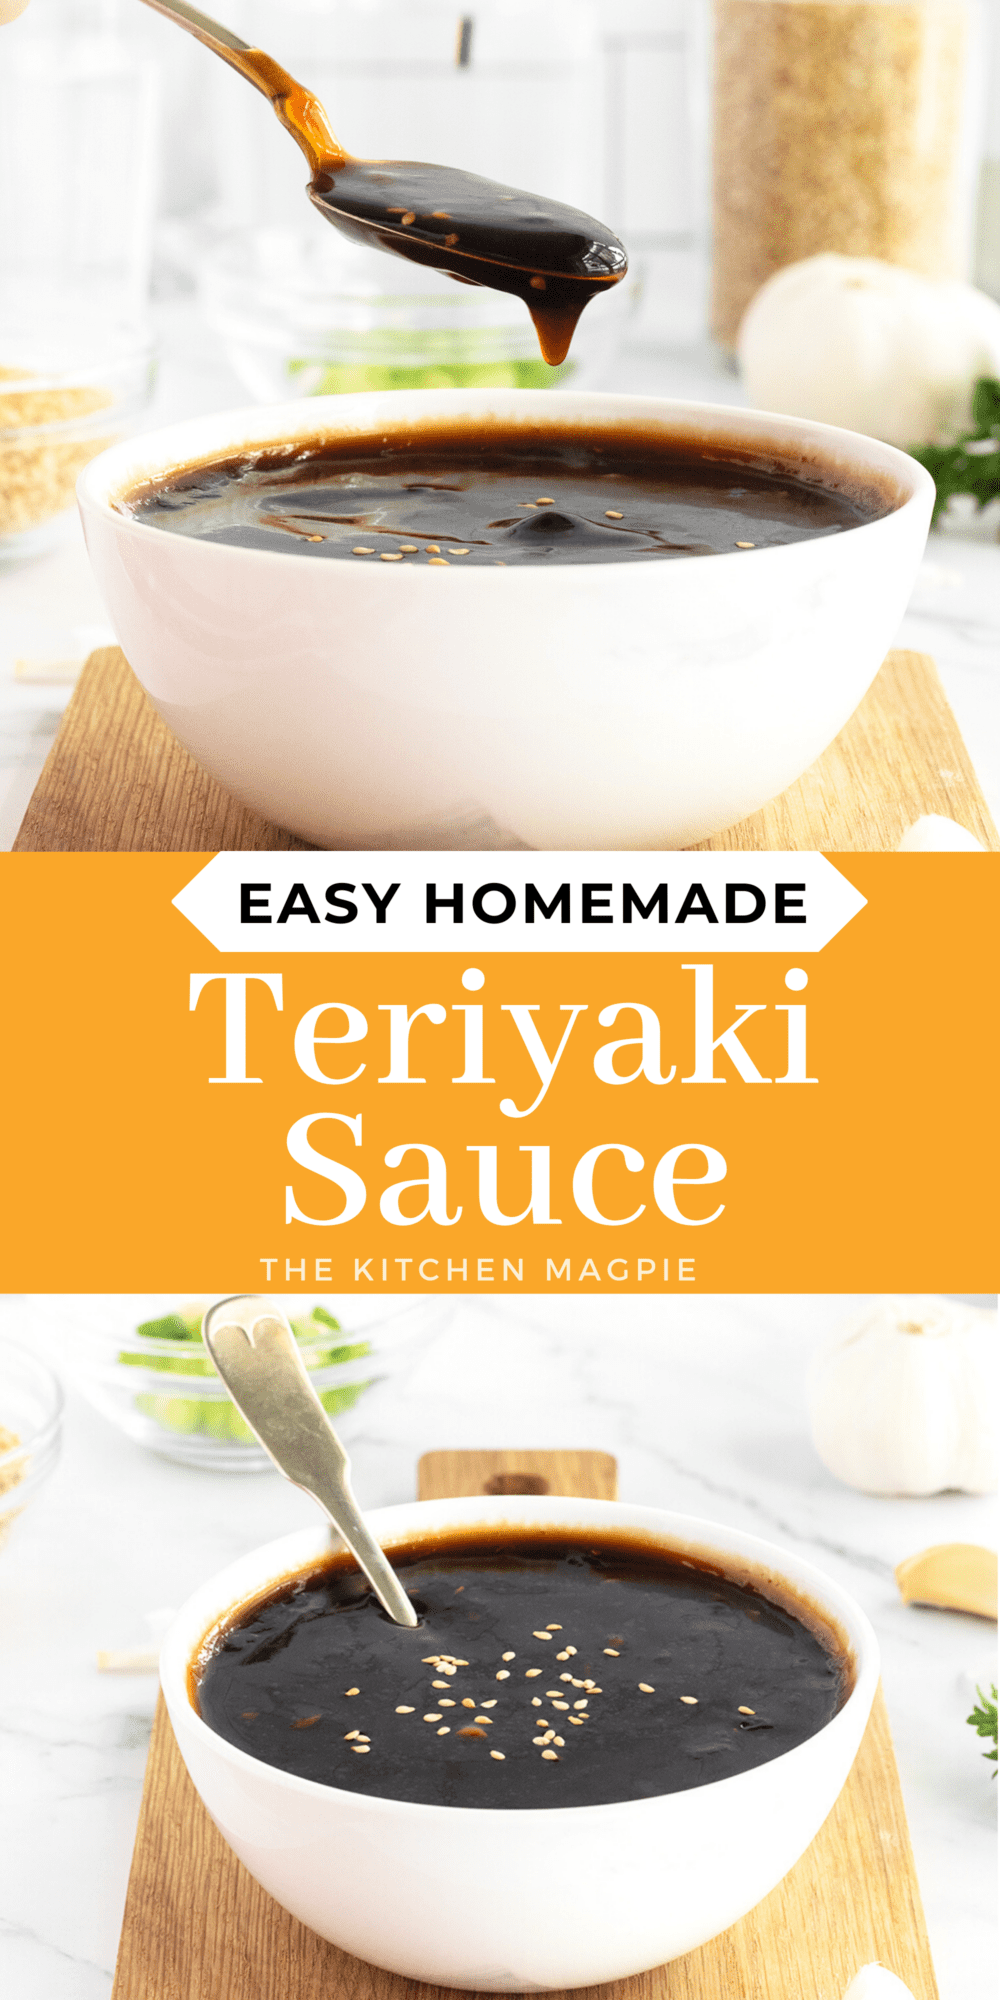 Incredibly versatile and appropriate as a sauce, marinade, or even a dip, teriyaki sauce is a mainstay of any Asian food lover's kitchen.